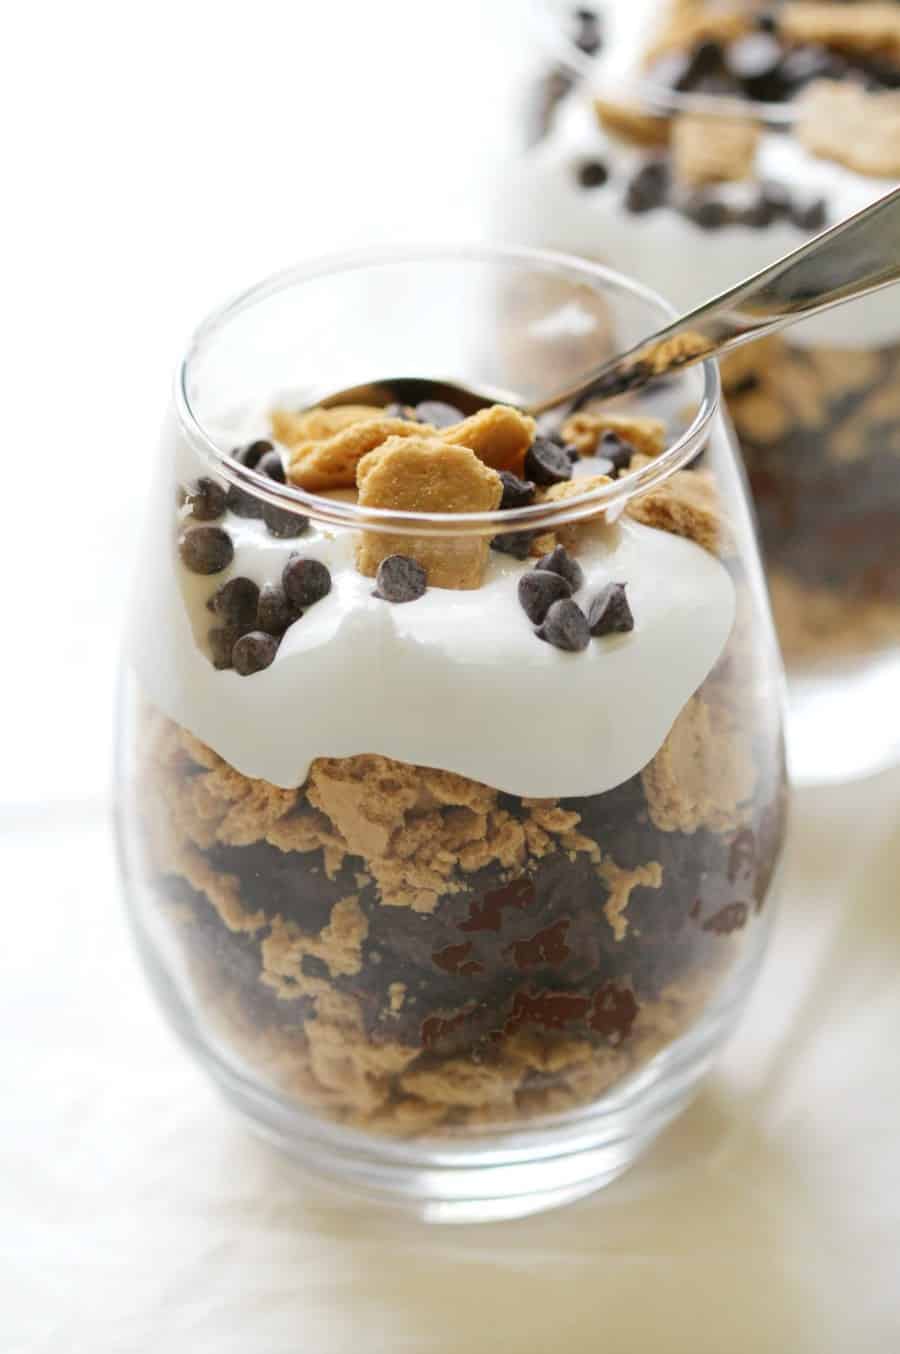 Easy gluten free chocolate granola parfait with whipped cream and chocolate chips.